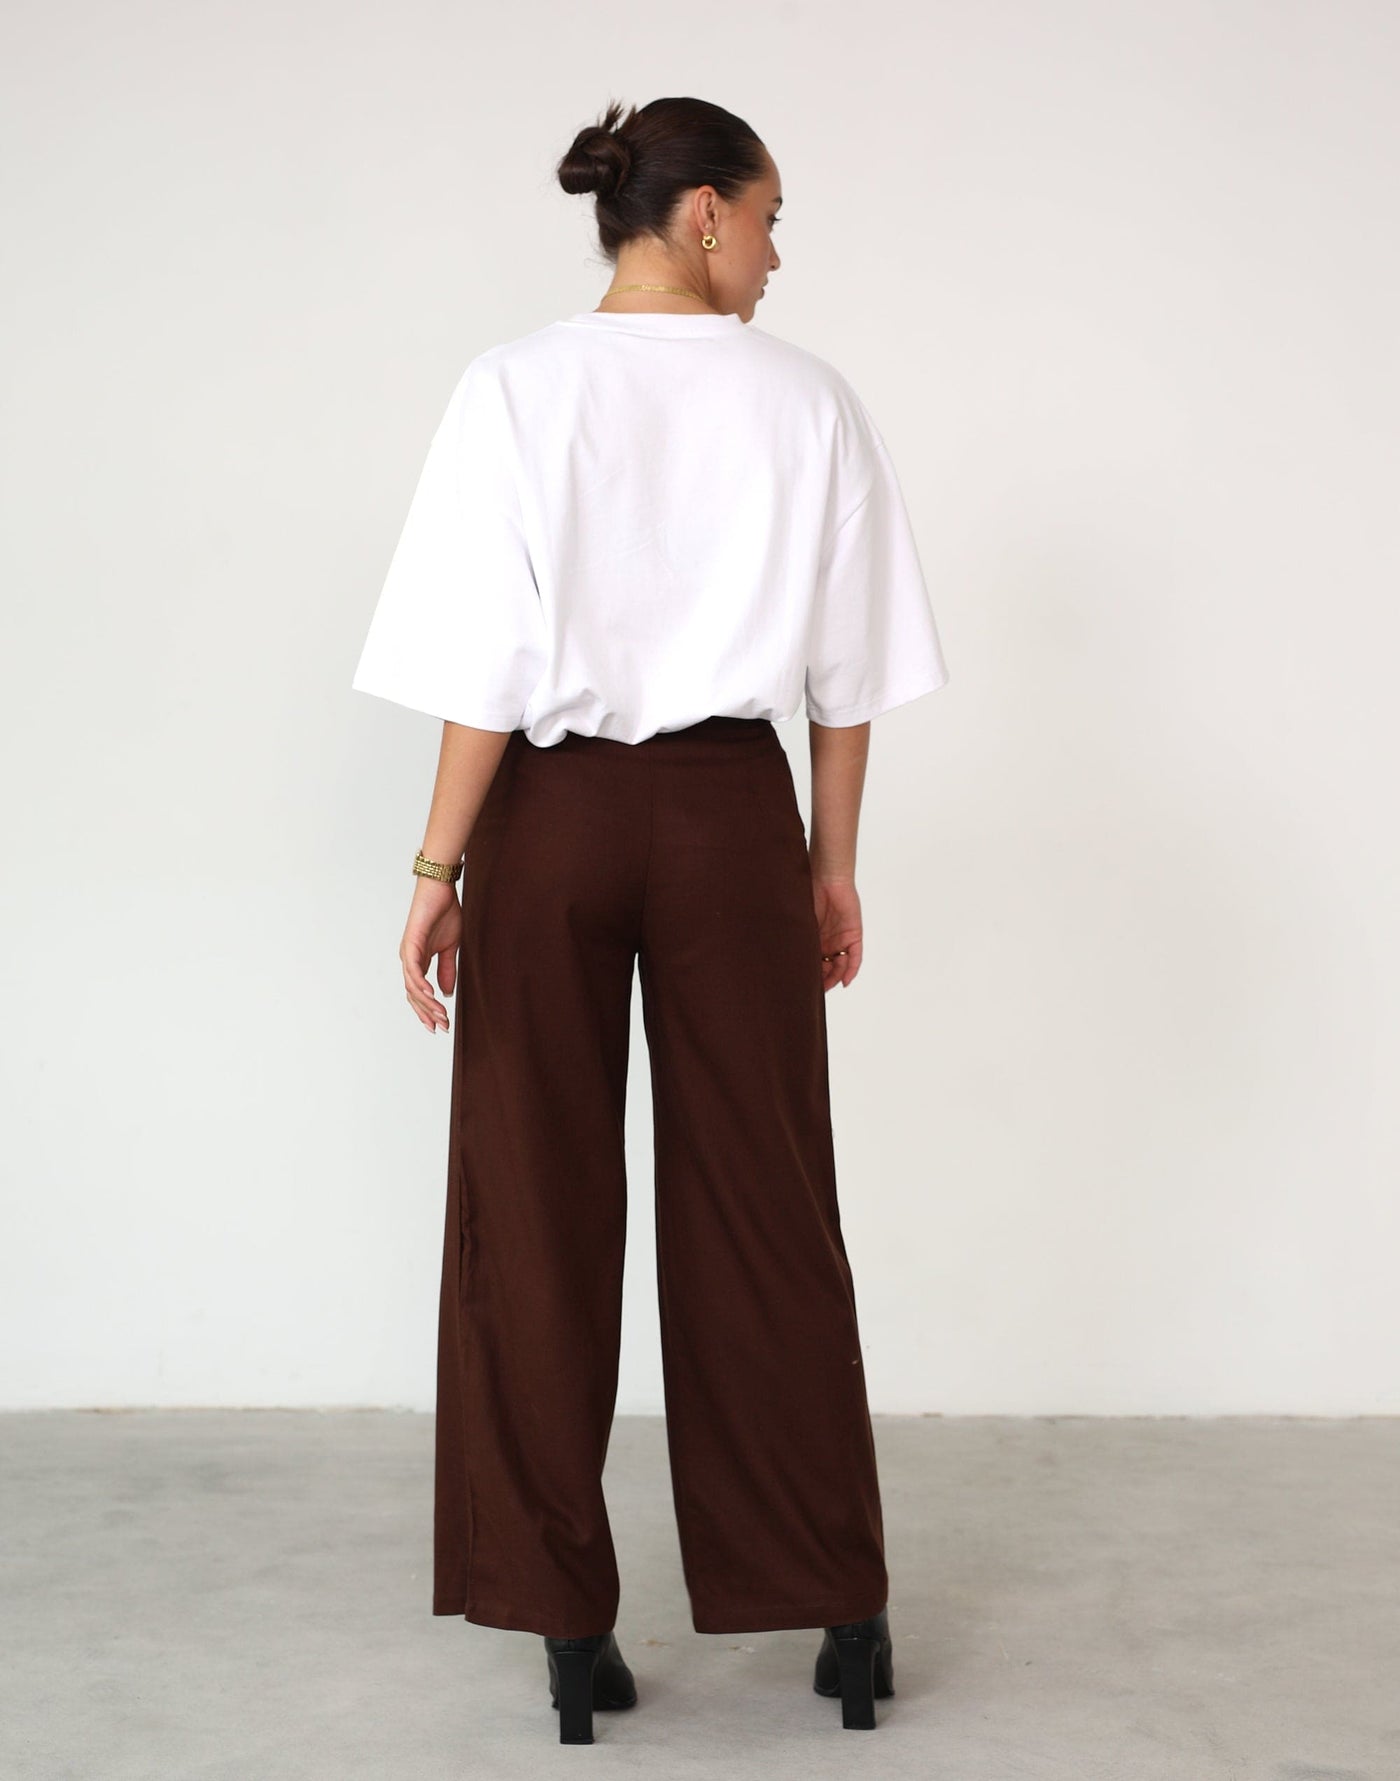 Kahlil Pants (Brown) - High Waisted Wide Leg Pants - Women's Pants - Charcoal Clothing